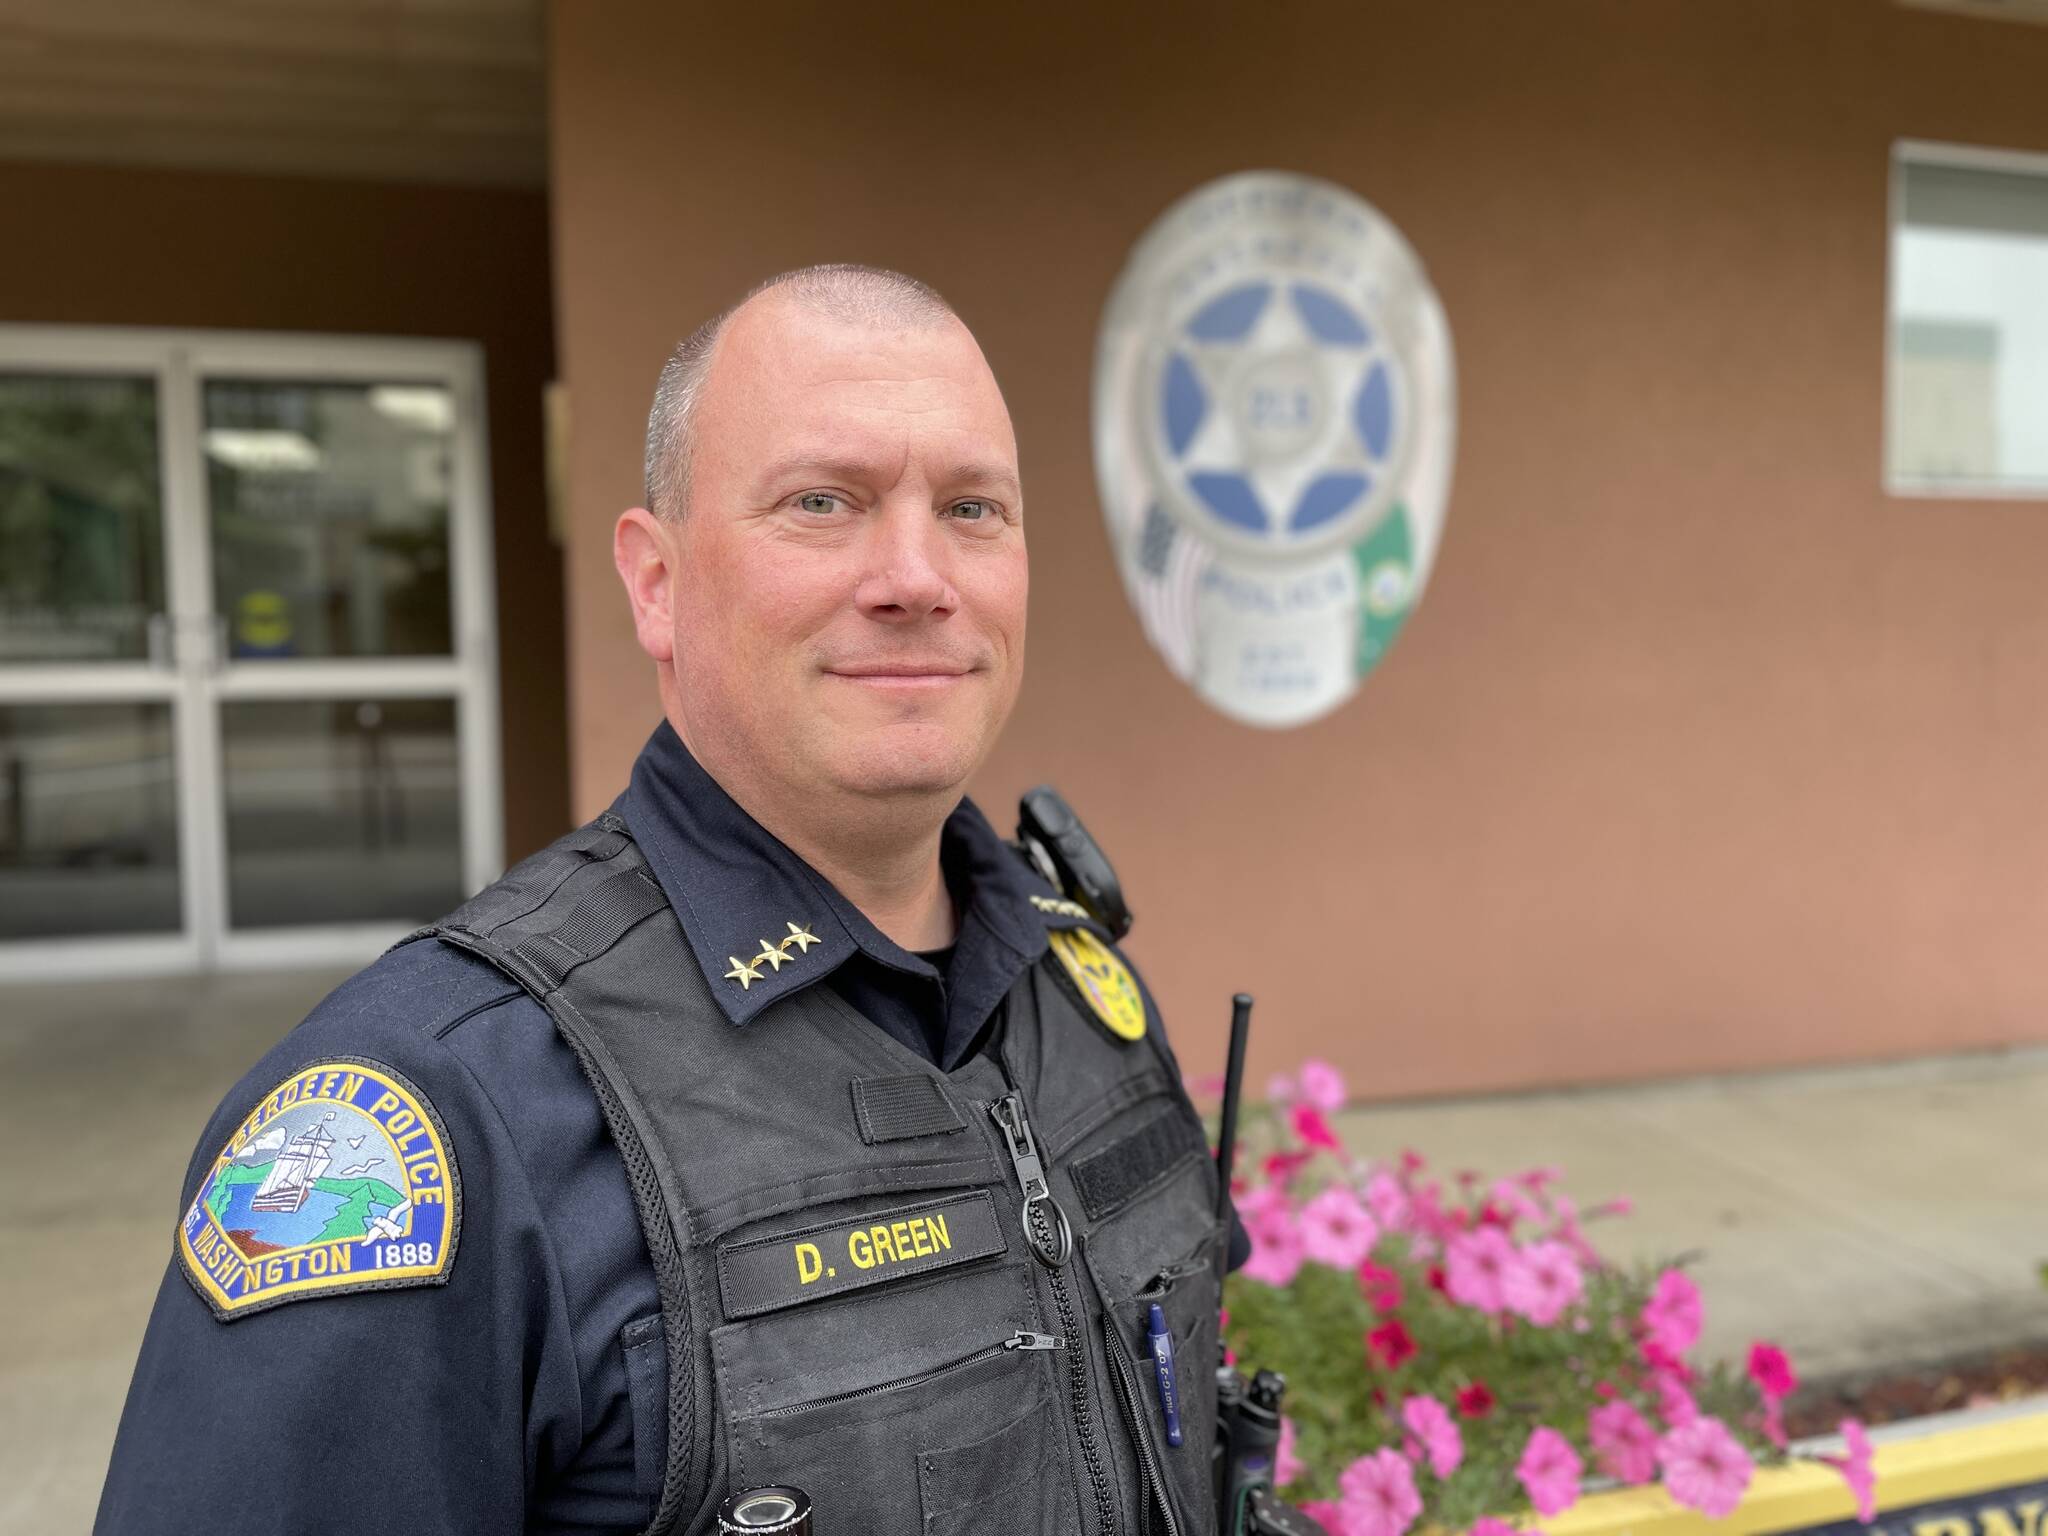 Chief Dale Green was confirmed by the city as the permanent replacement for Chief Steve Schumate, who recently retired. Green has been with the Aberdeen Police Department since 1996, and was acting as interim chief before the confirmation last week. (Michael S. Lockett | The Daily World)